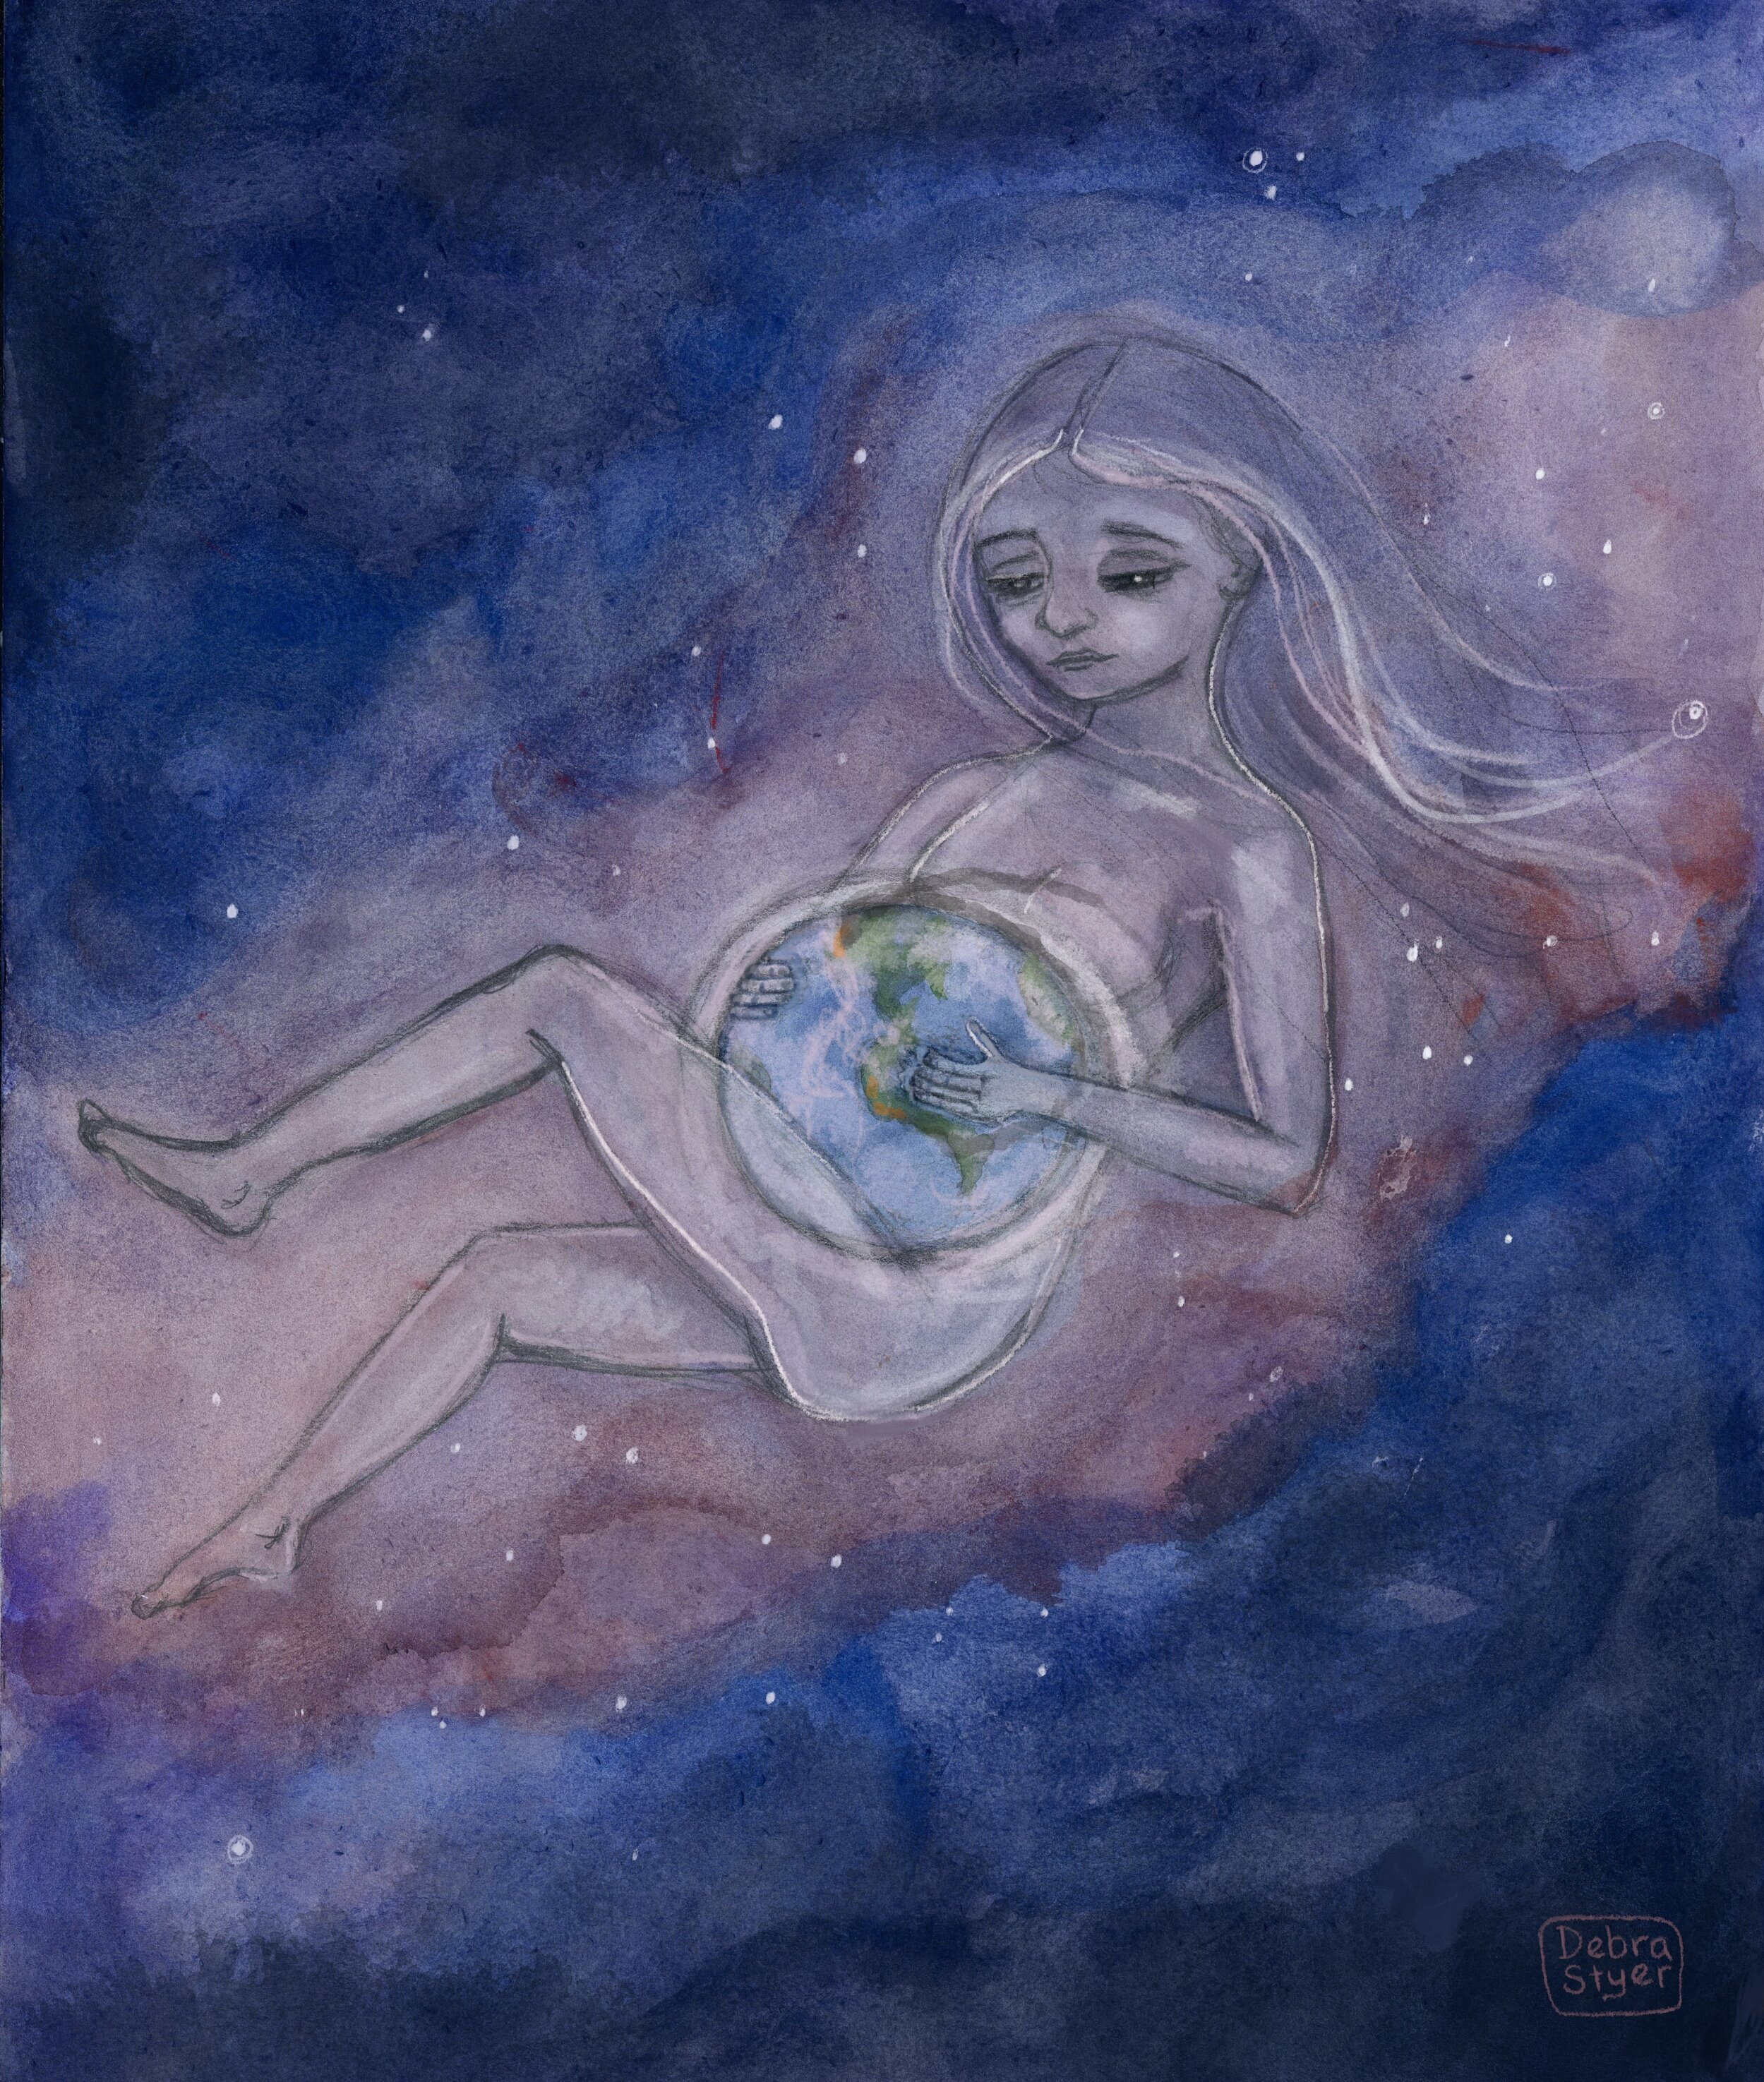 My illustration for the Our Other Mother (Planet Earth) Campaign